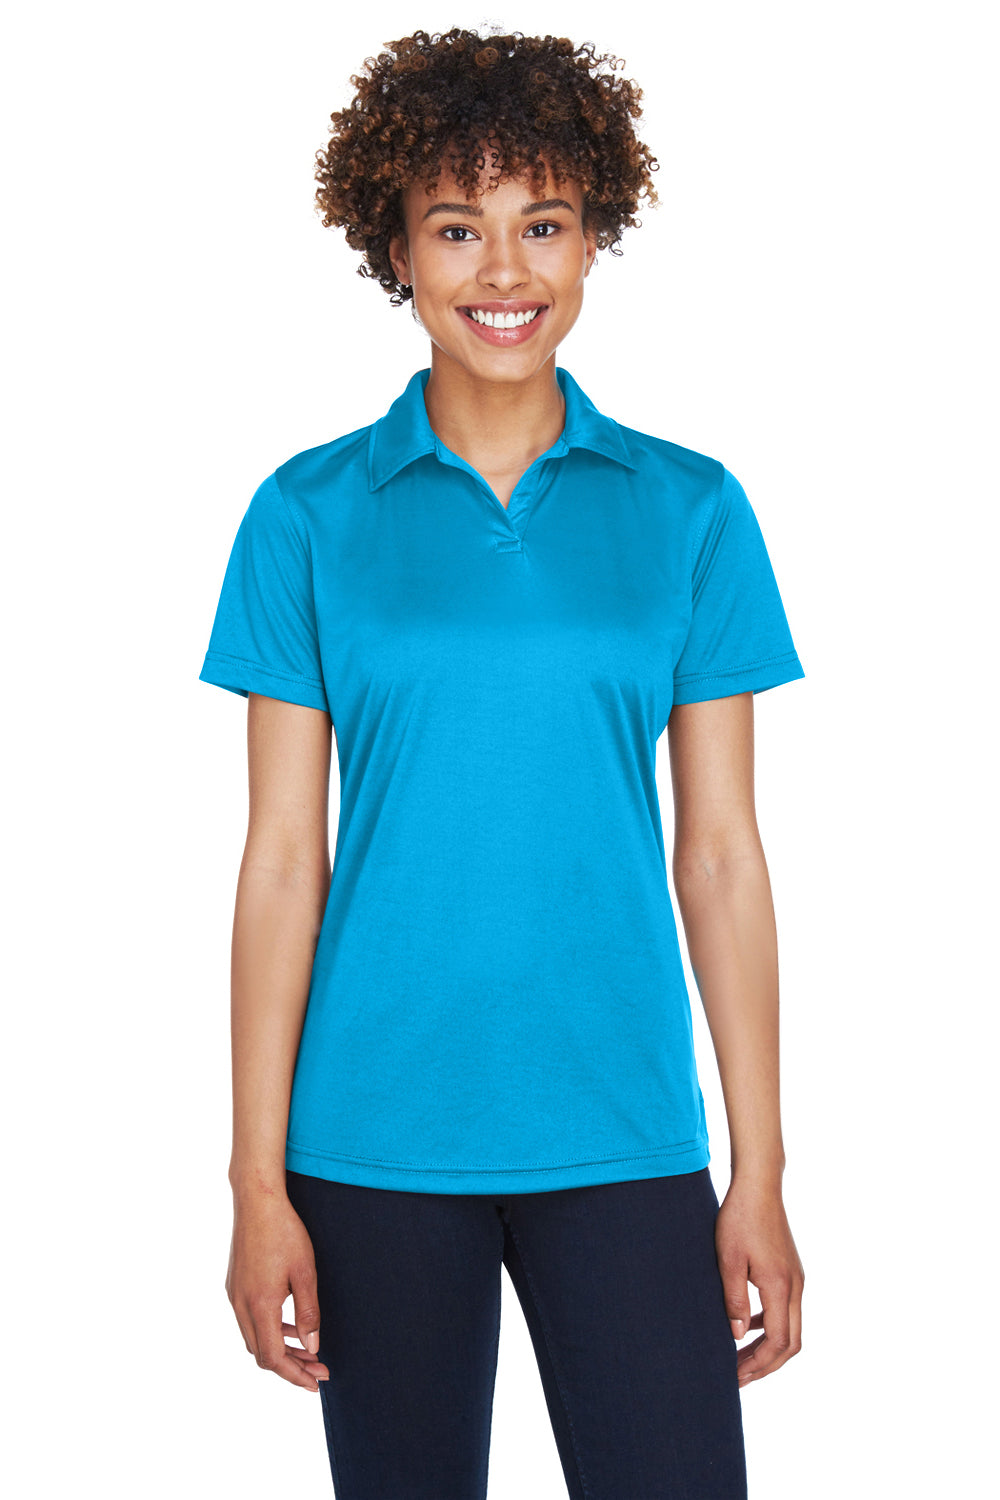 UltraClub 8425L Womens Cool & Dry Performance Moisture Wicking Short Sleeve Polo Shirt Sapphire Blue Front